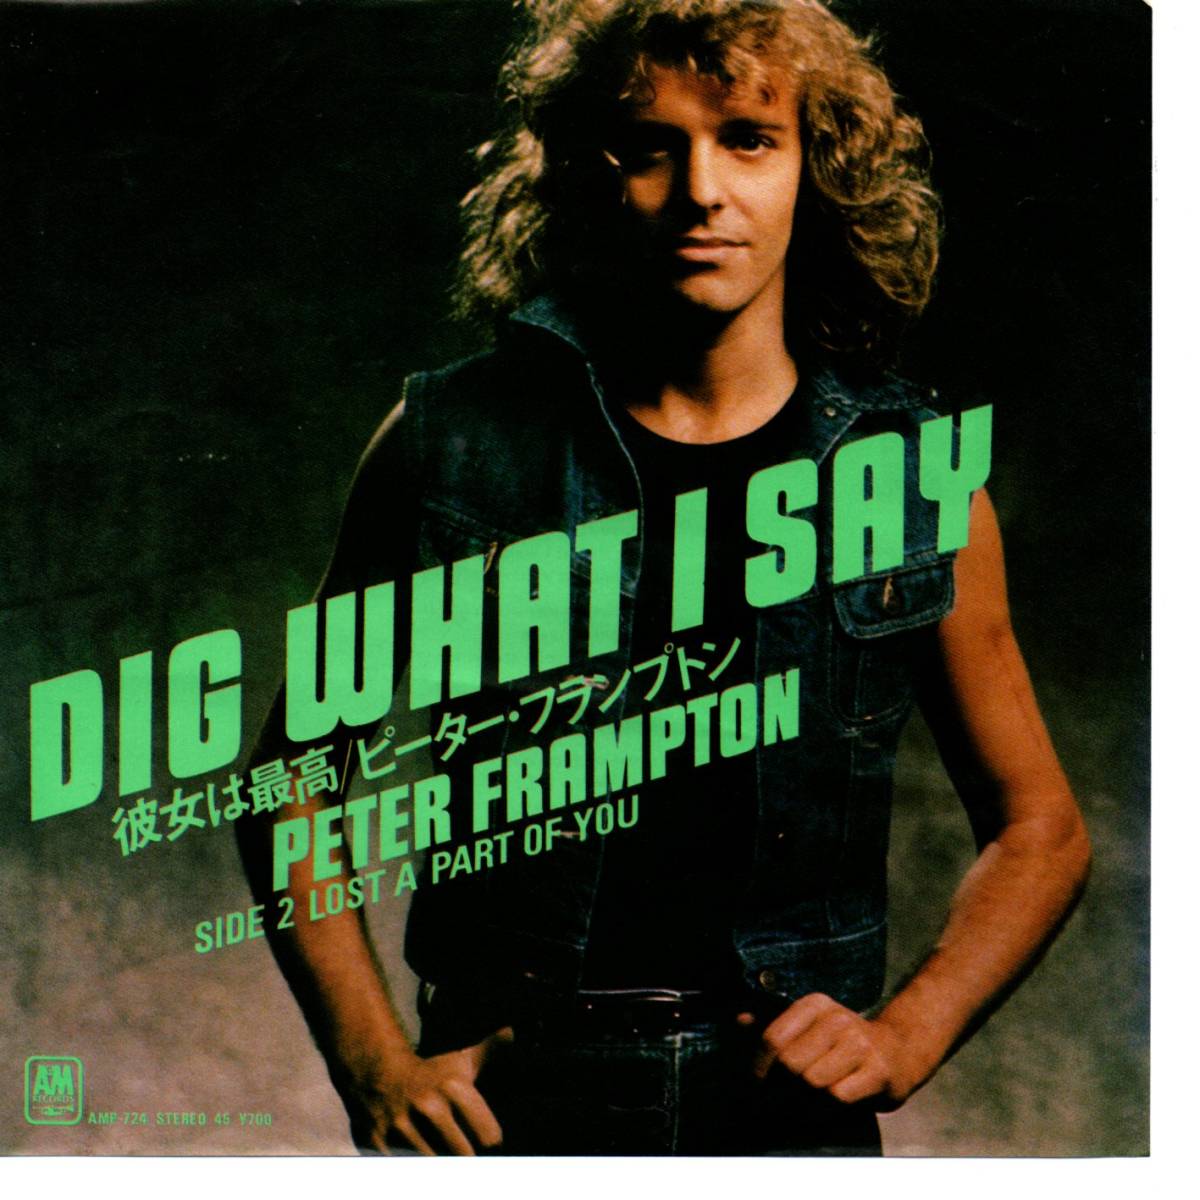 Peter Frampton 「Dig What I Say/ Lost A Part Of You」国内盤サンプルEPレコード_画像1